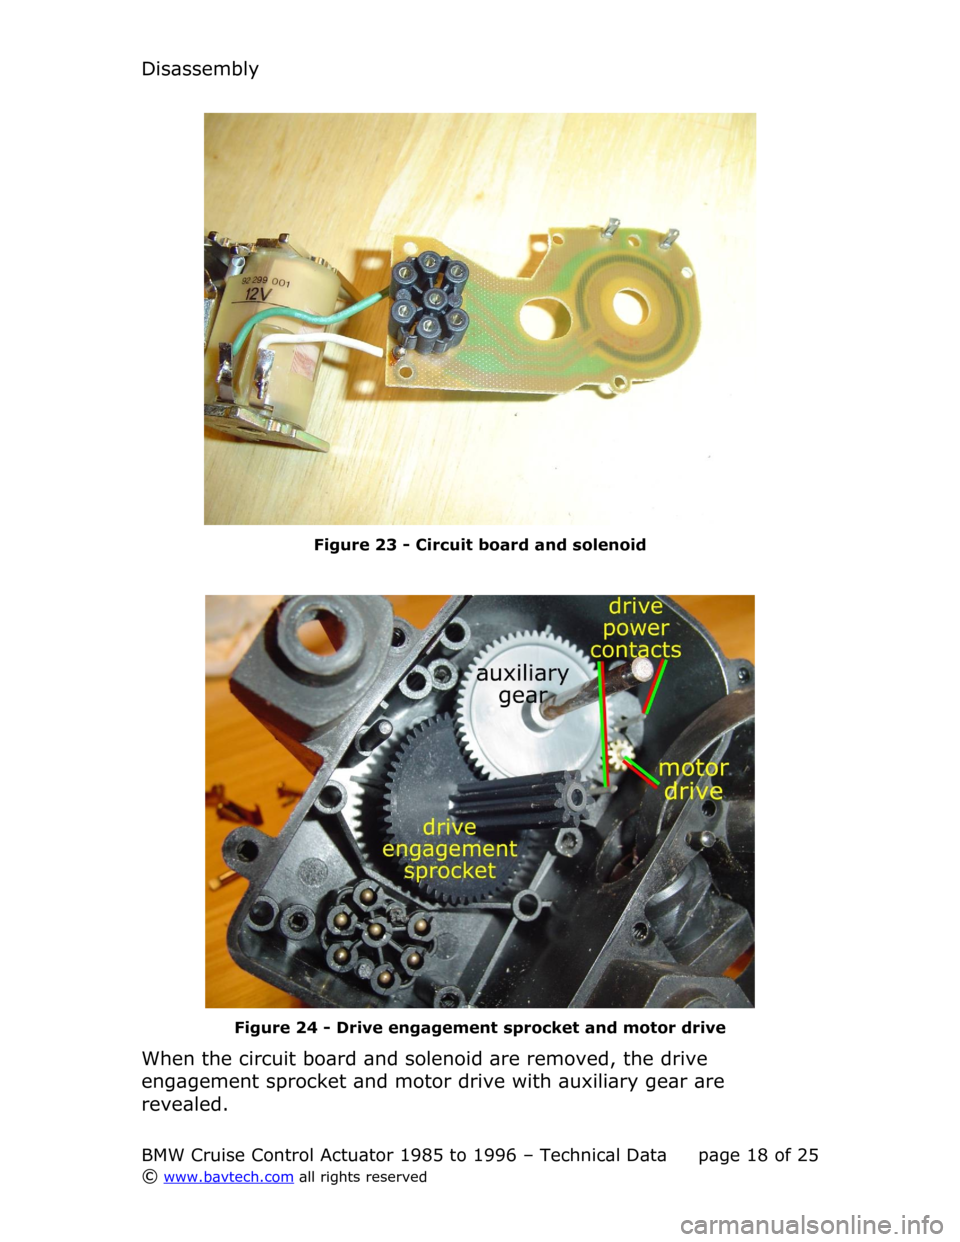 BMW 7 SERIES 1989 E32 Cruise Control Acutator Disassembly
Figure  23  - Circuit board and solenoid
Figure  24  - Drive engagement sprocket and motor drive
When the circuit board and solenoid are removed, the drive  
engagement sprocket and motor 